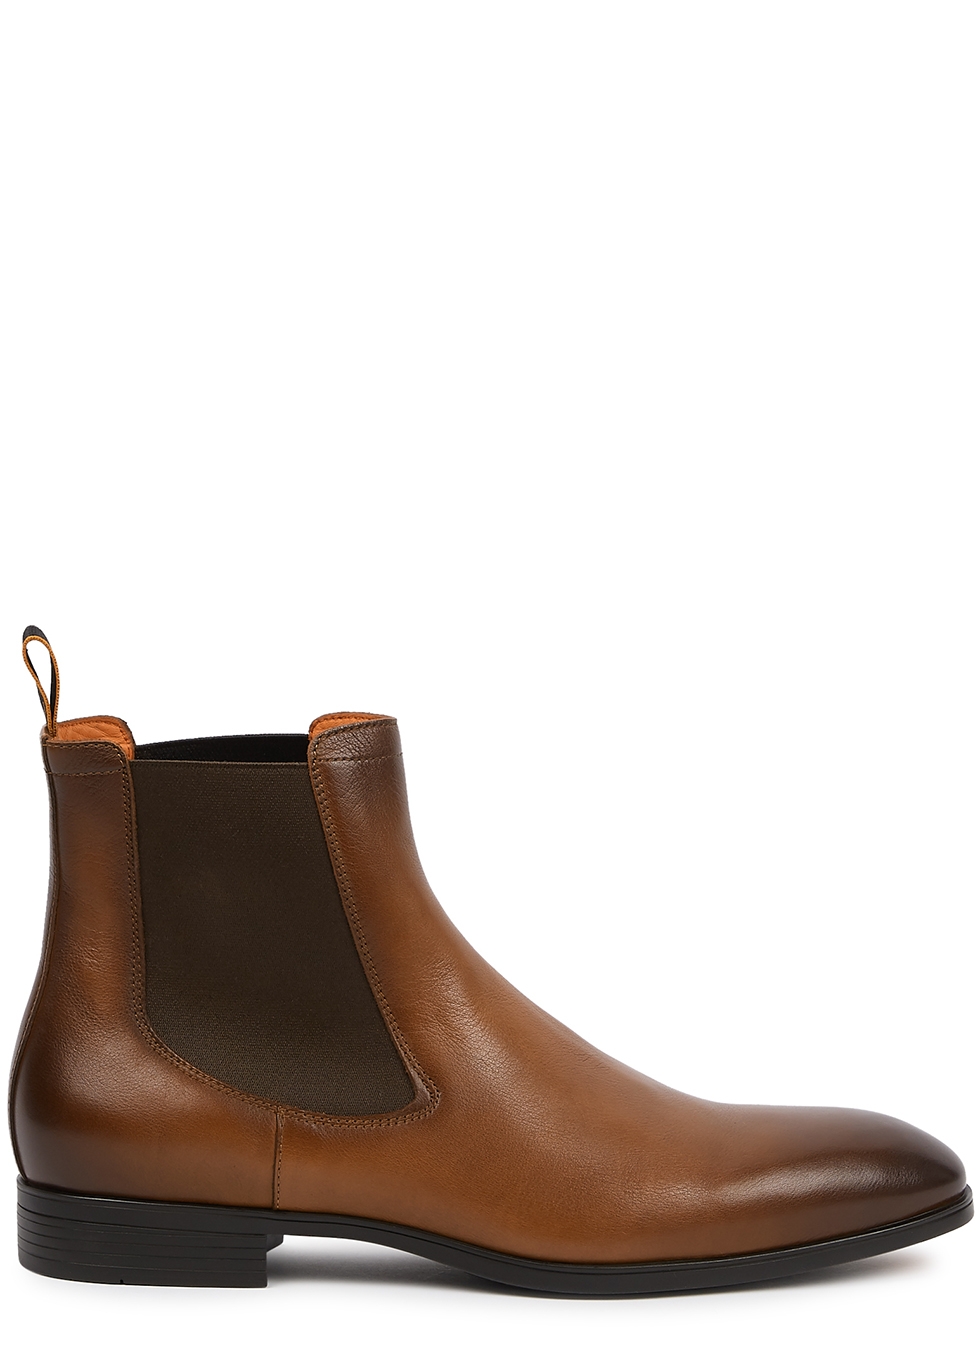 Detoxify brown leather Chelsea boots